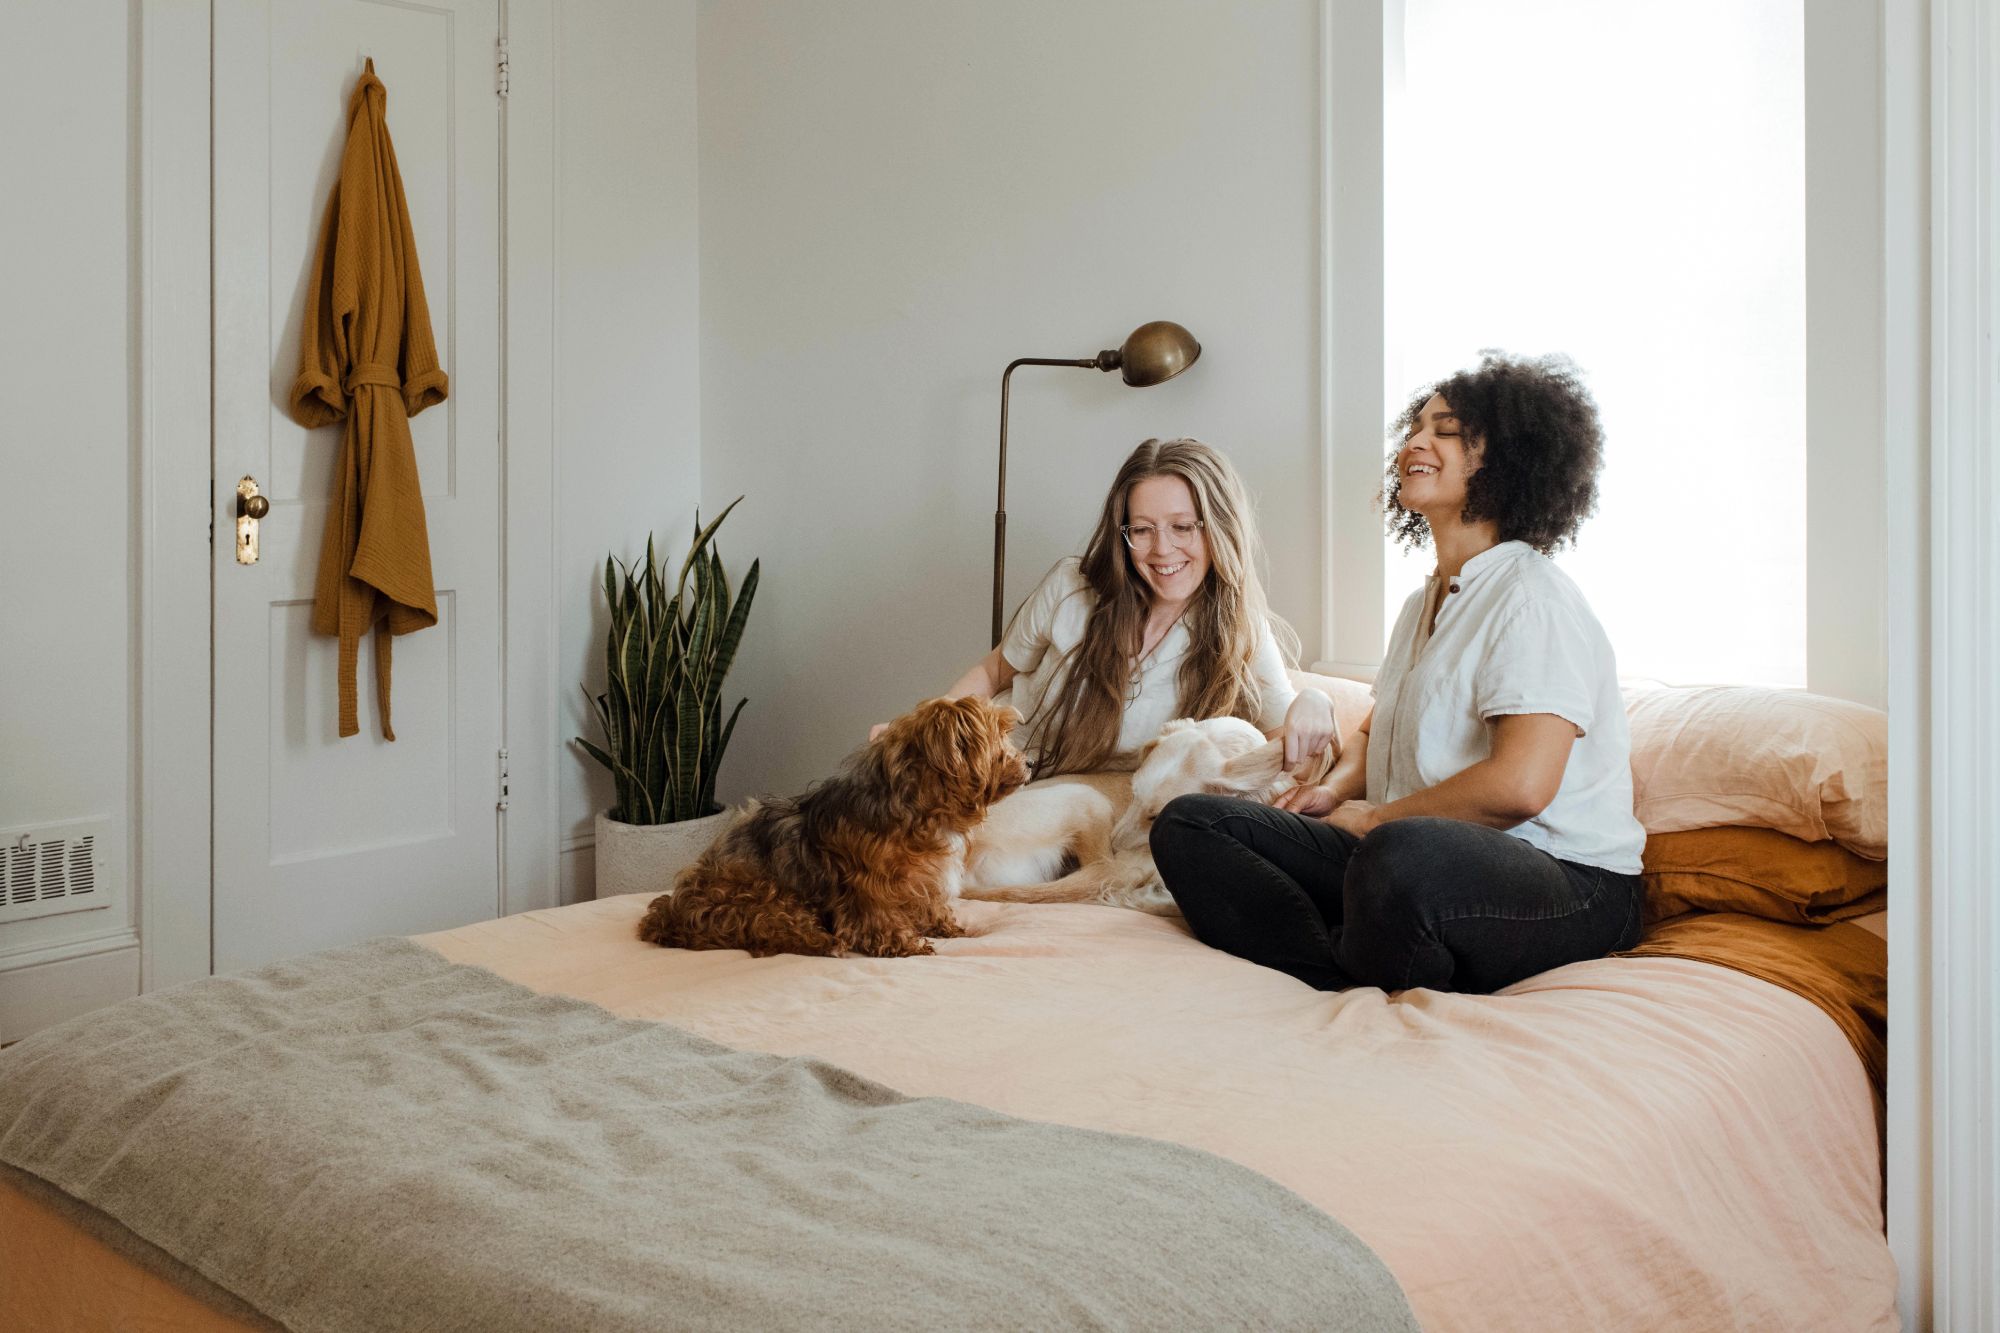 Women petting dog on bed; bamboo floor lamps